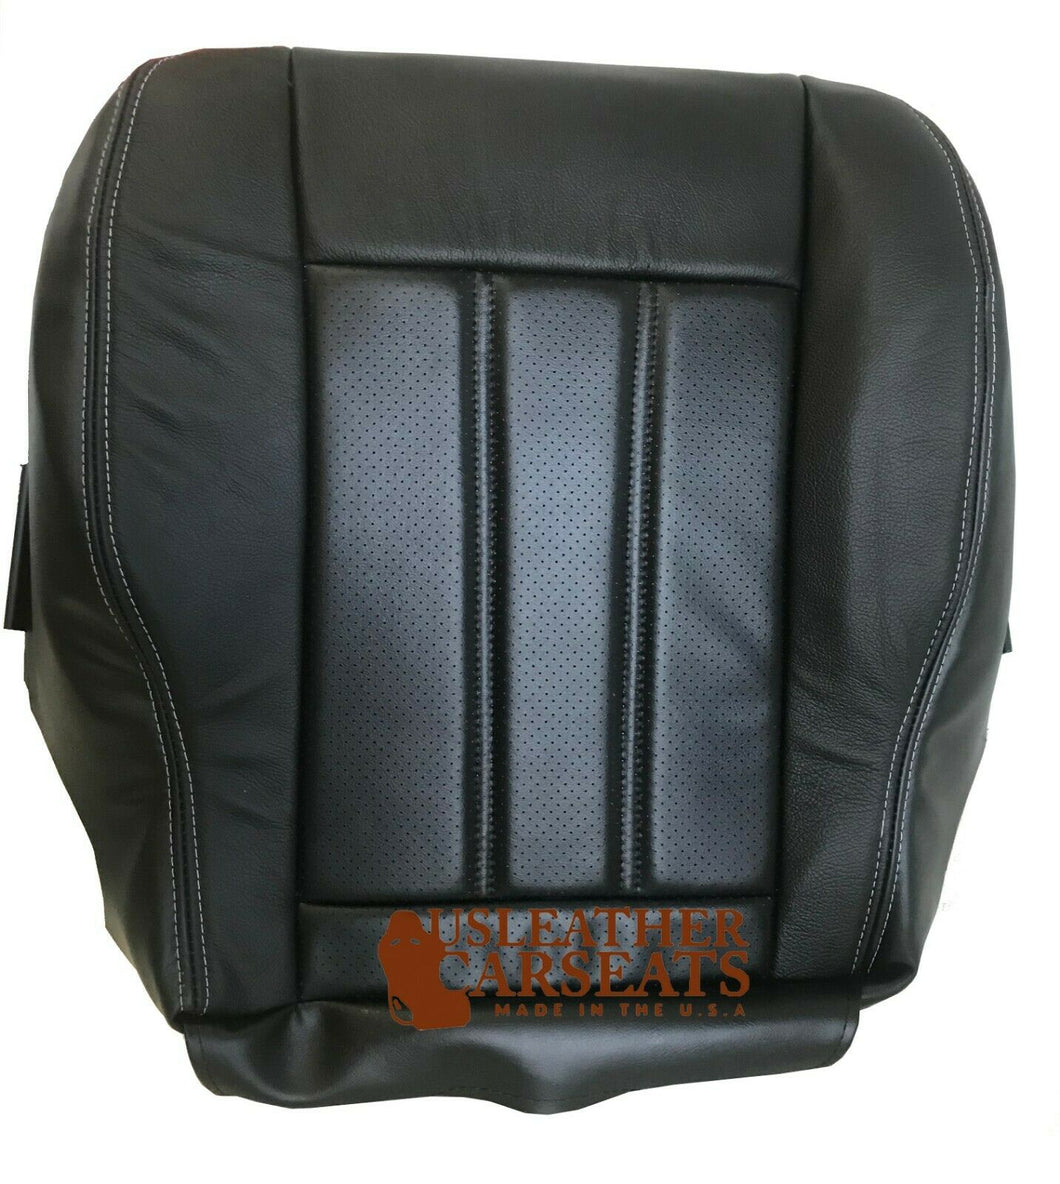 09 Fits Chrysler Town&Country Driver Bottom Leather Perforated Vinyl Seat Cover Black